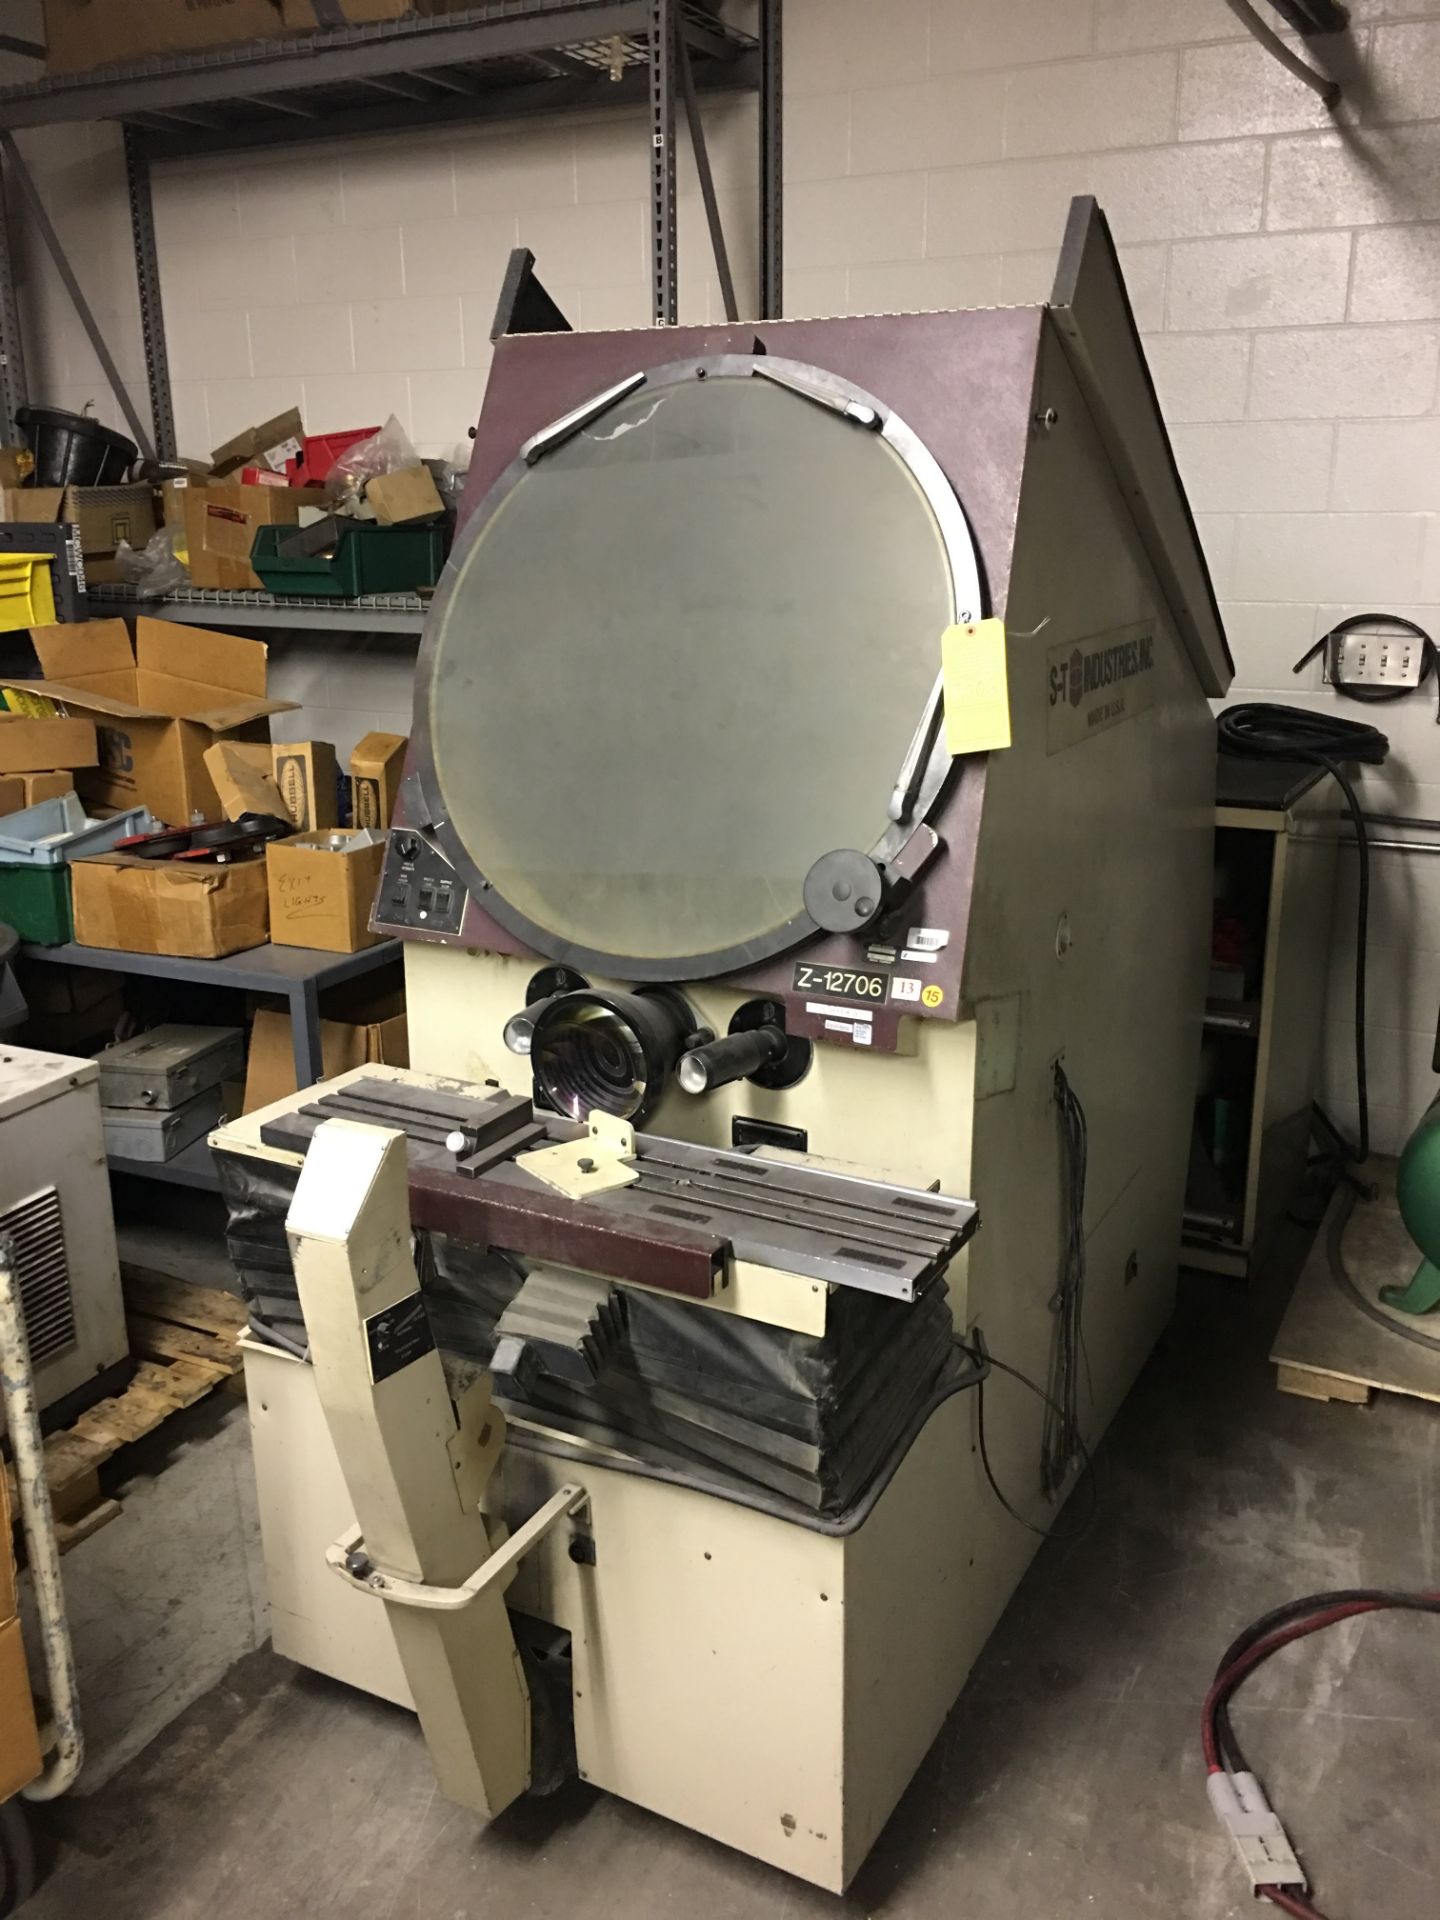 S-T INDUSTRIES OPTICAL COMPARATOR MODEL 22-2600 S#T914802 115 VOLTS, 8 AMPS, 50-60 CYCLES, 1 PHASE( - Image 4 of 6